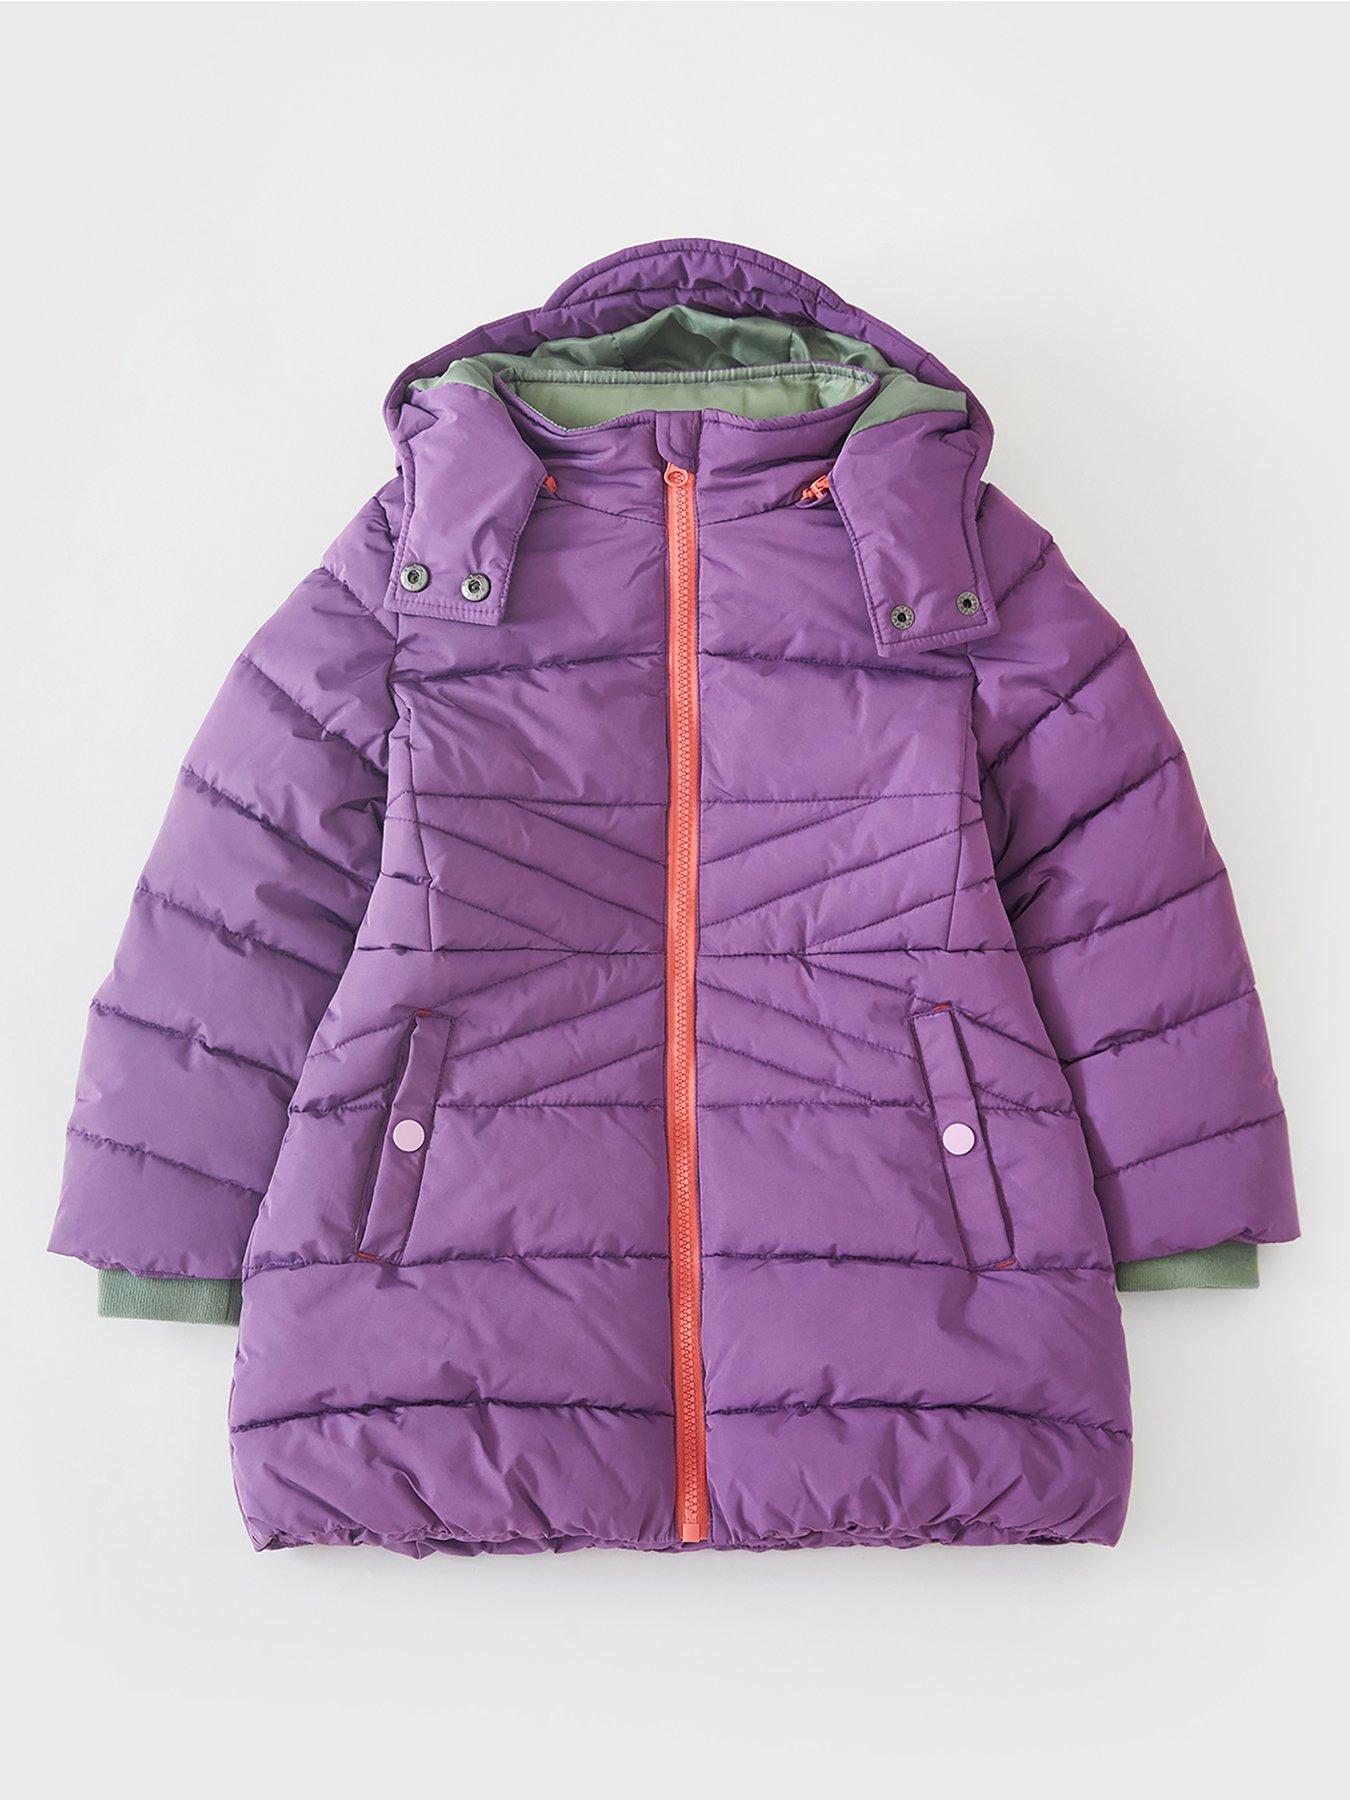 Back to School Boys and Girls Kids Thicked Warm Windproof Jacket with Hood Taped Seams and Zip Up Pockets Age of 3-12 